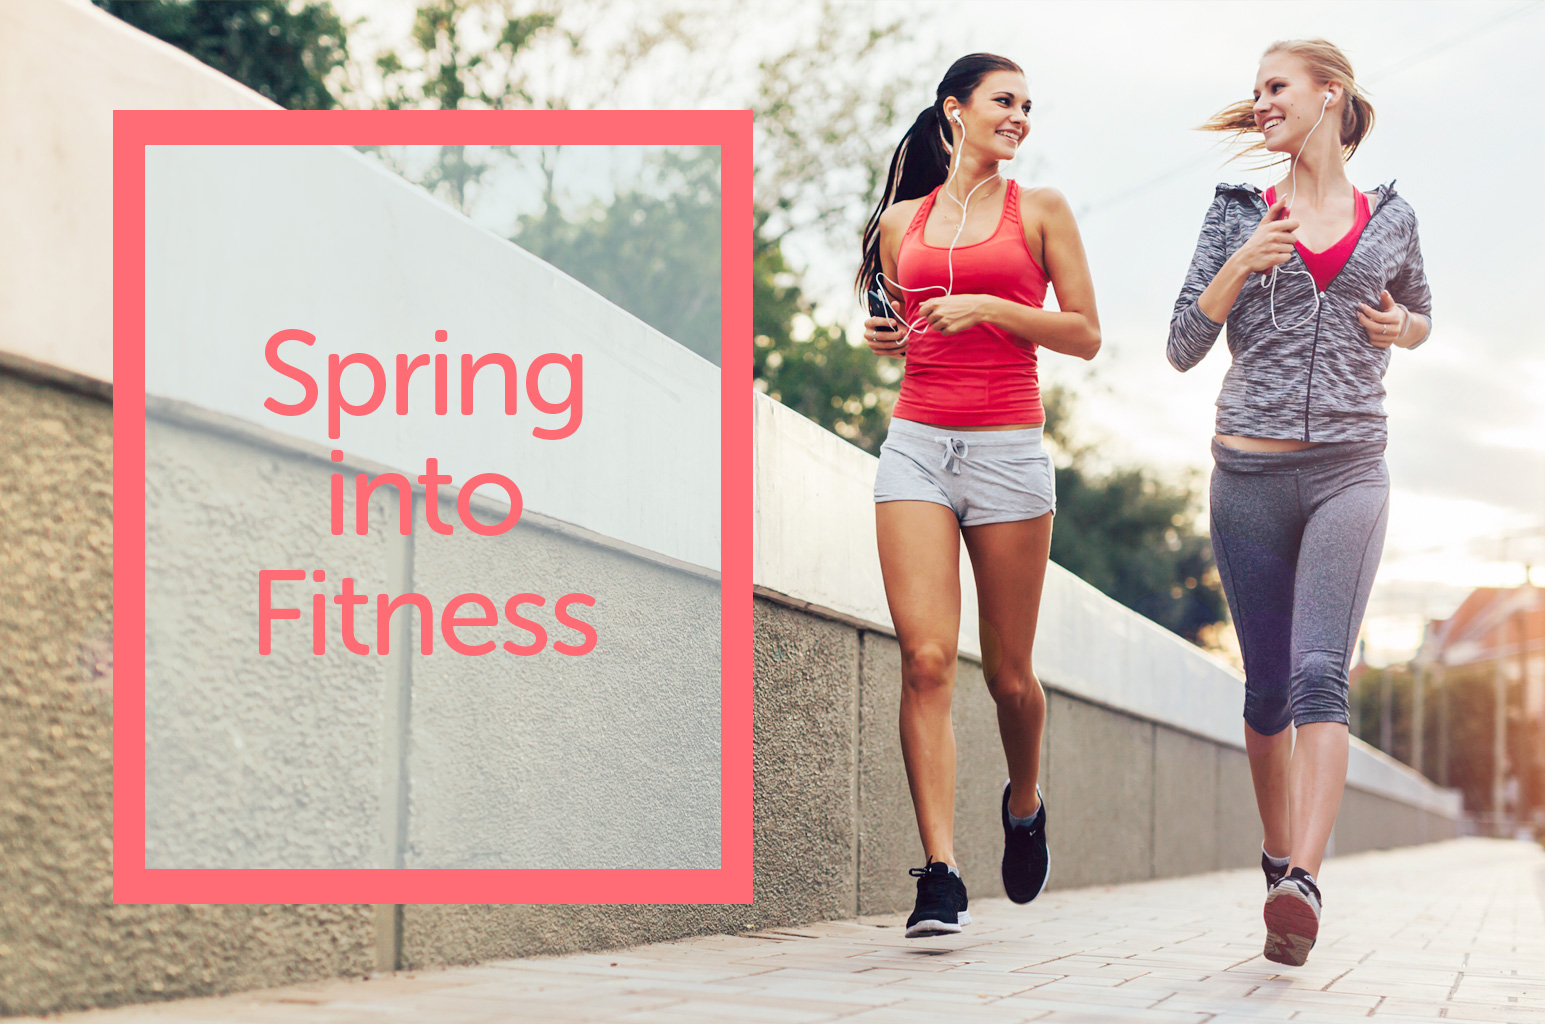 Spring into Fitness